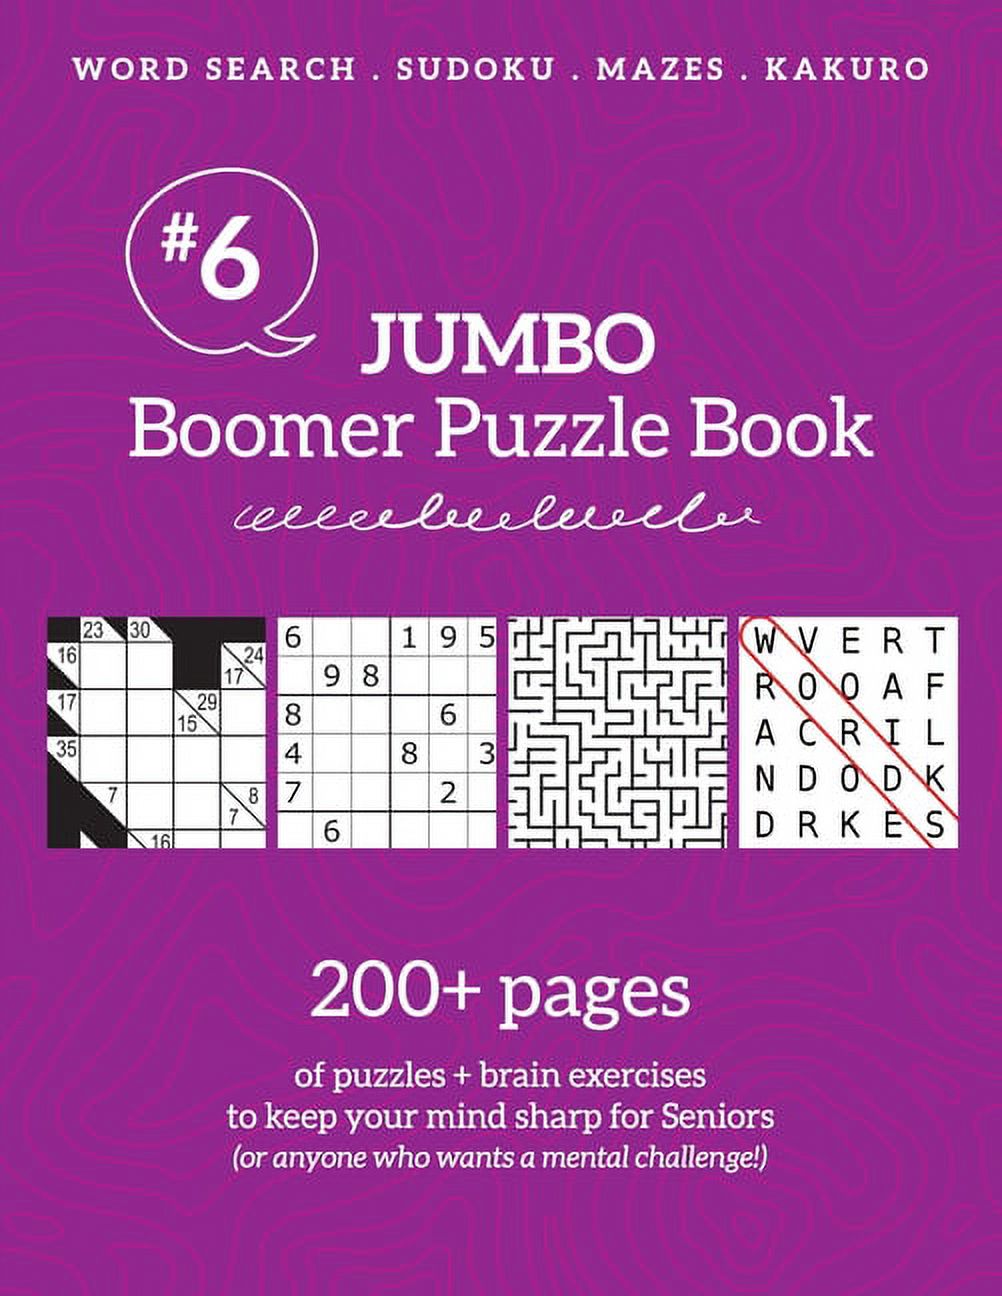 Jumbo Boomer Puzzle Book #6: 200+ pages of puzzles & brain exercises to keep your mind sharp for Seniors (Paperback) - image 1 of 1